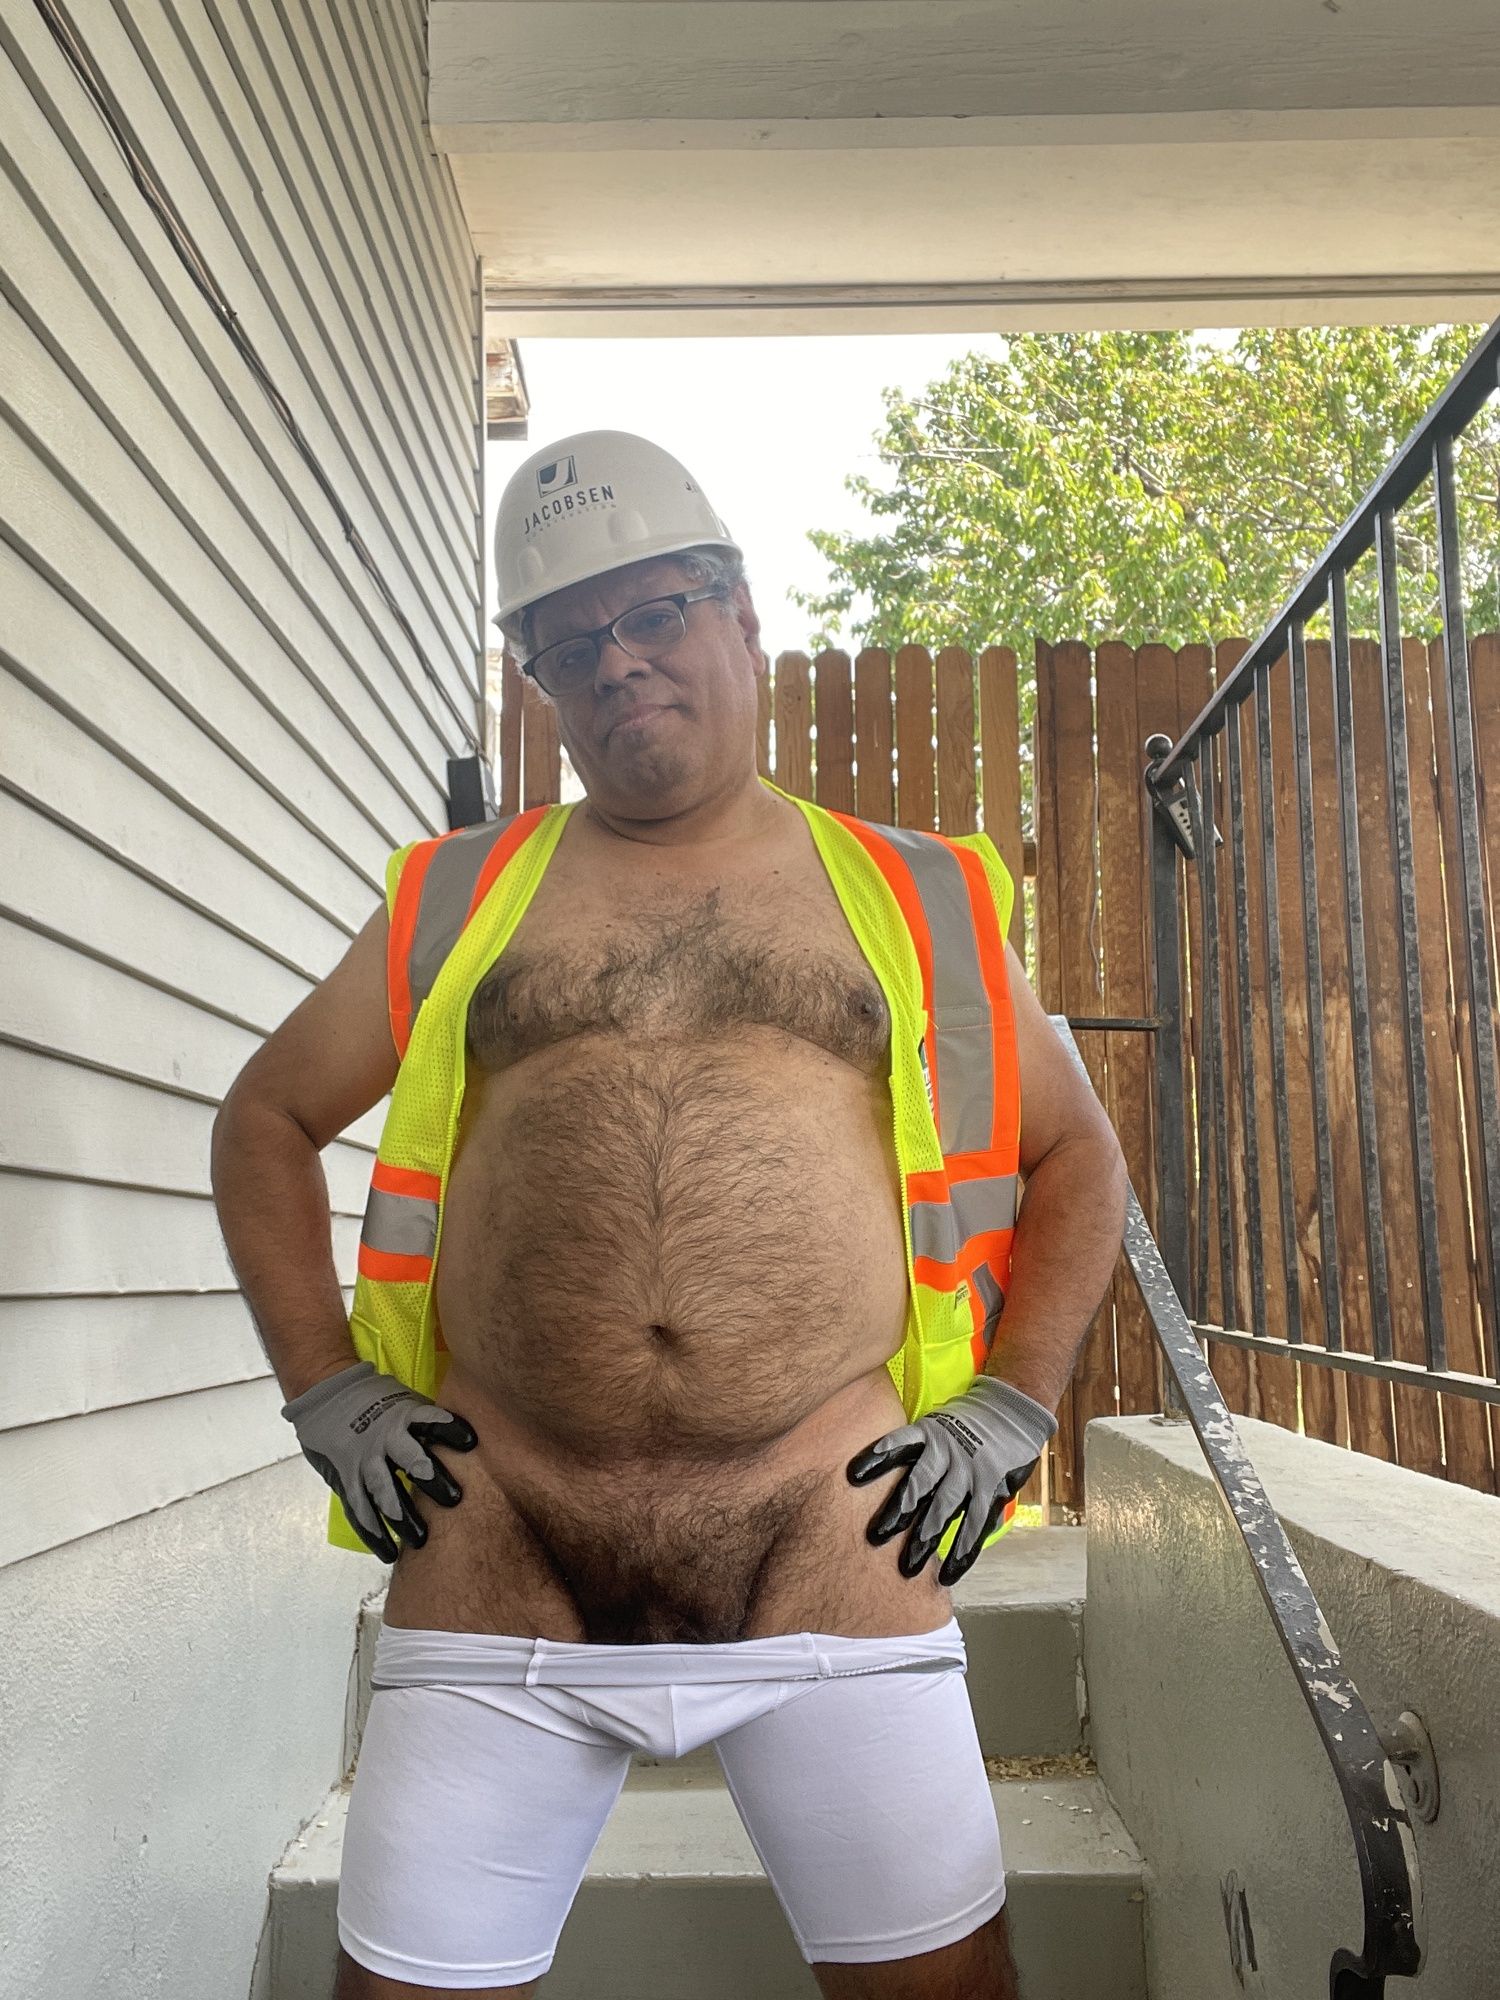 The Hard Construction Worker